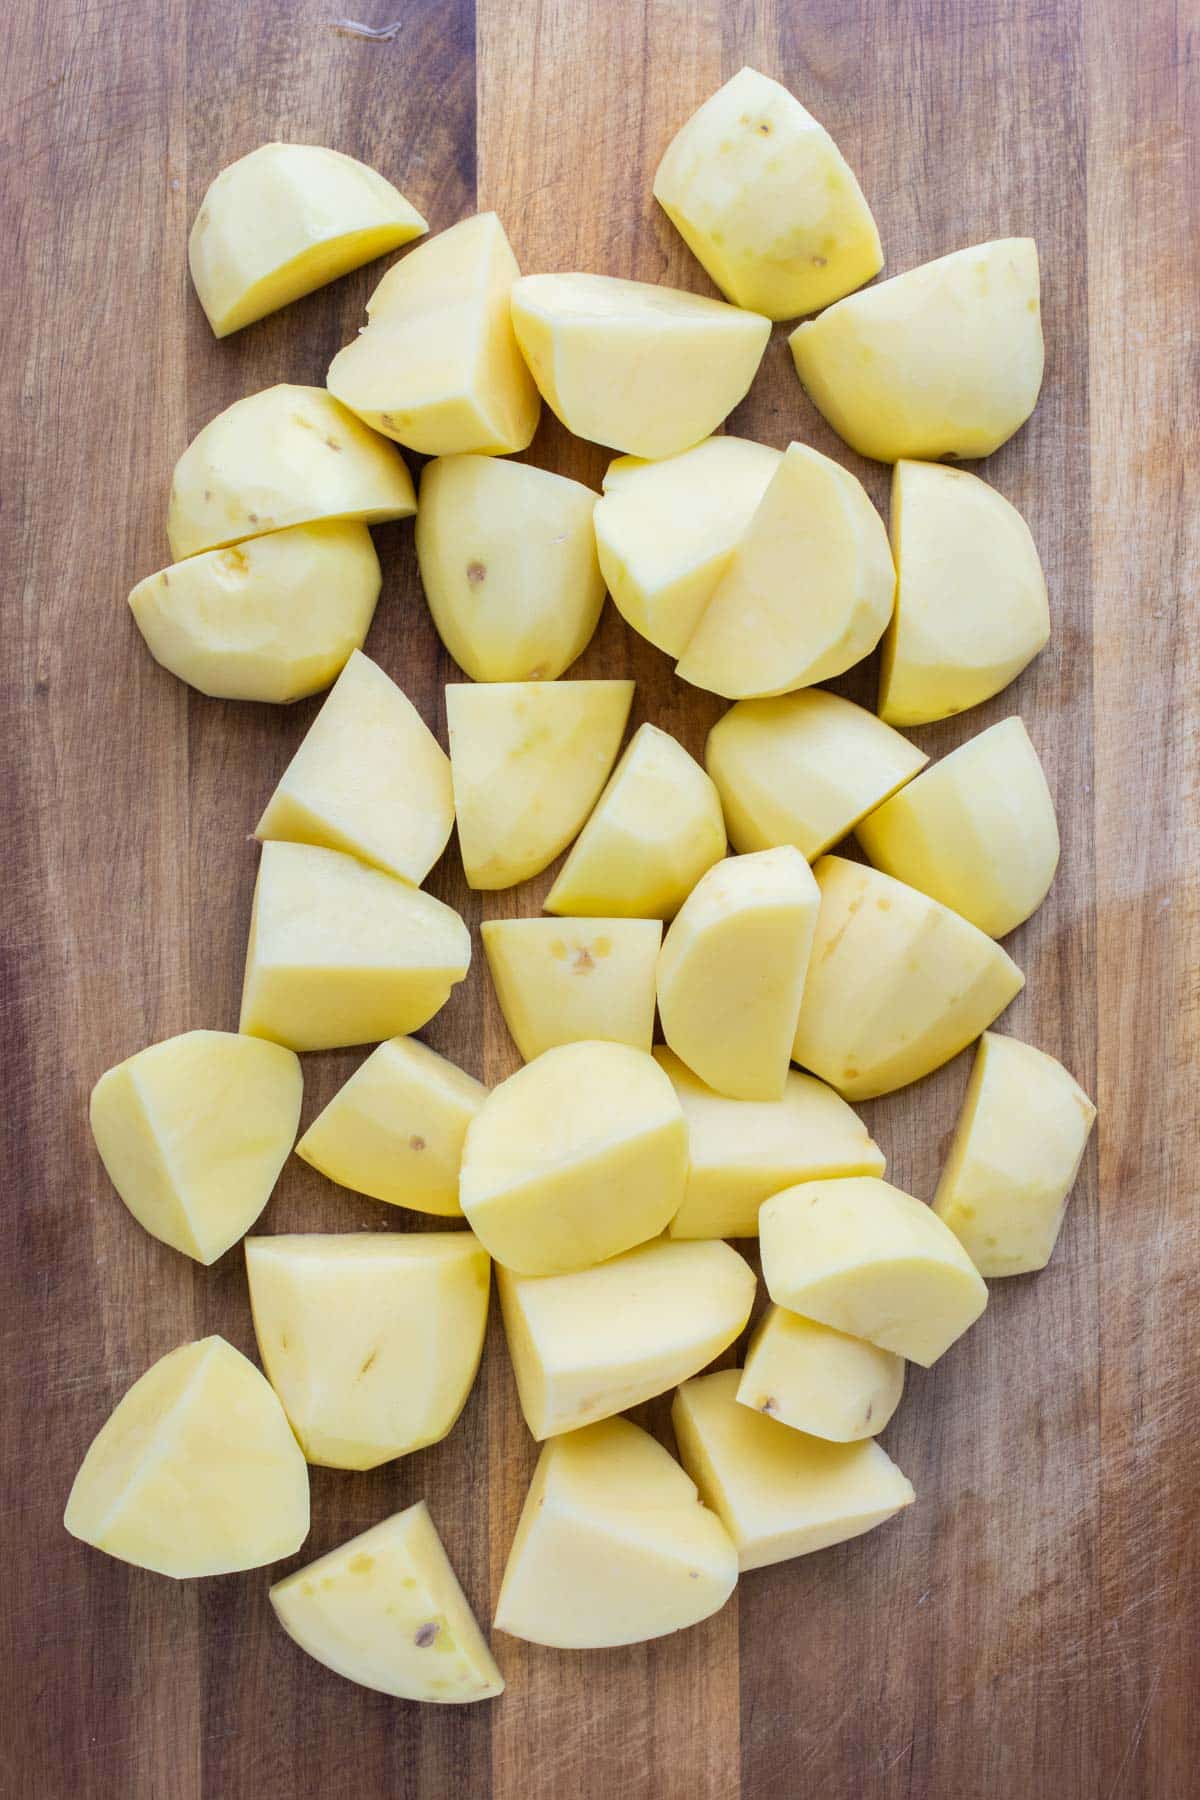 Peeled and cubed yukon gold potatoes on a cutting board.